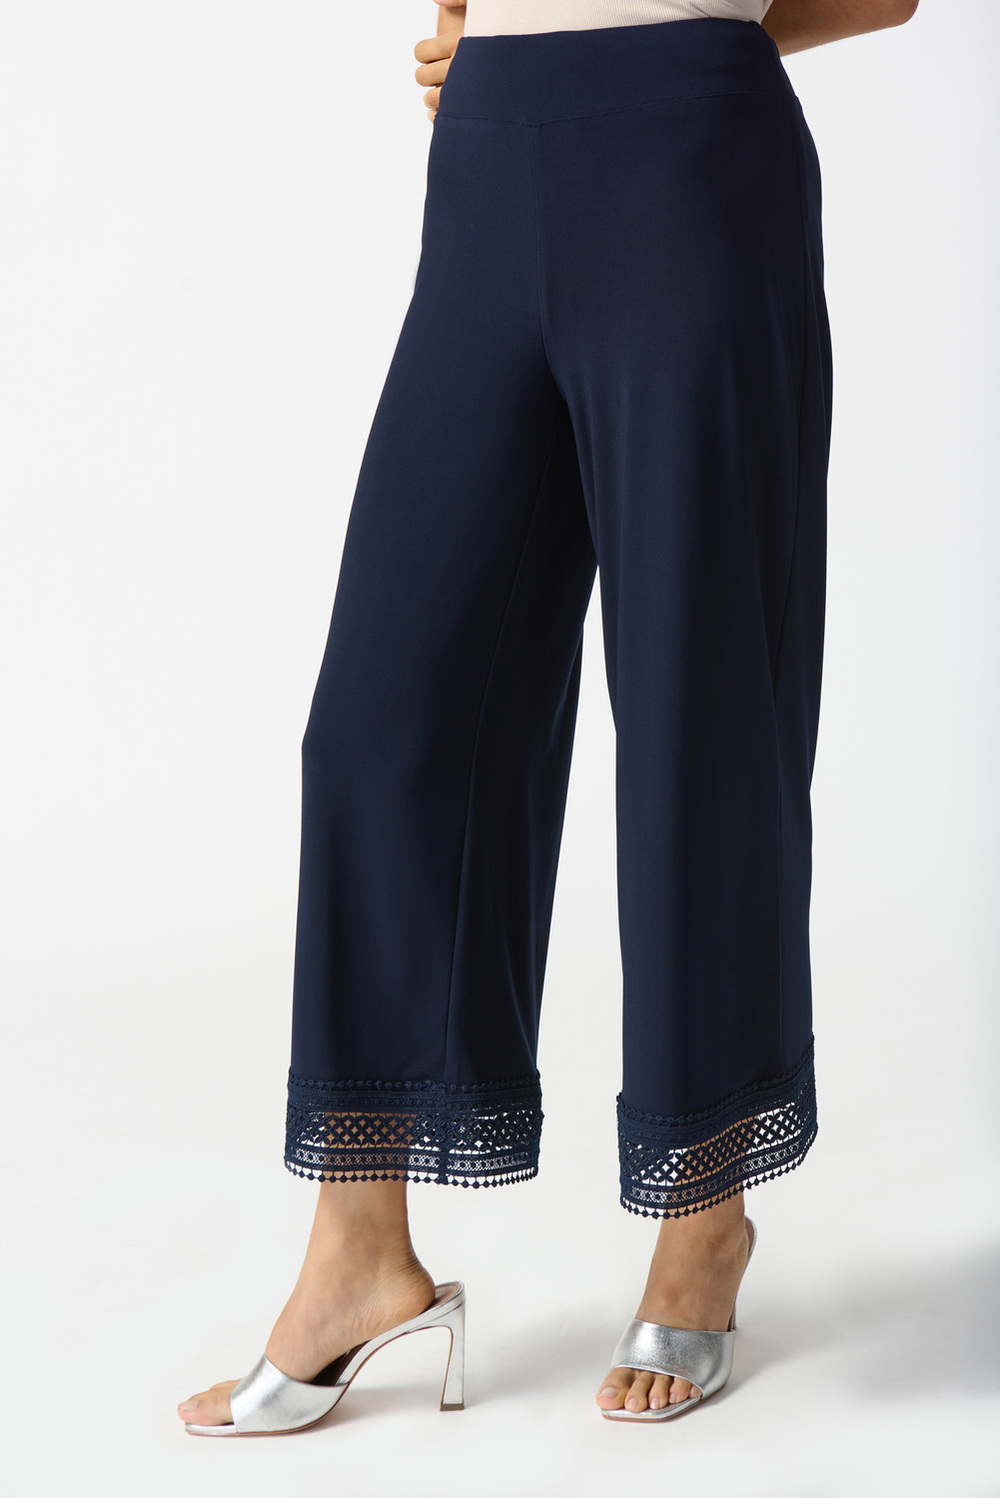 Lace Detail Cuff Pant Style 242134. Midnight Blue